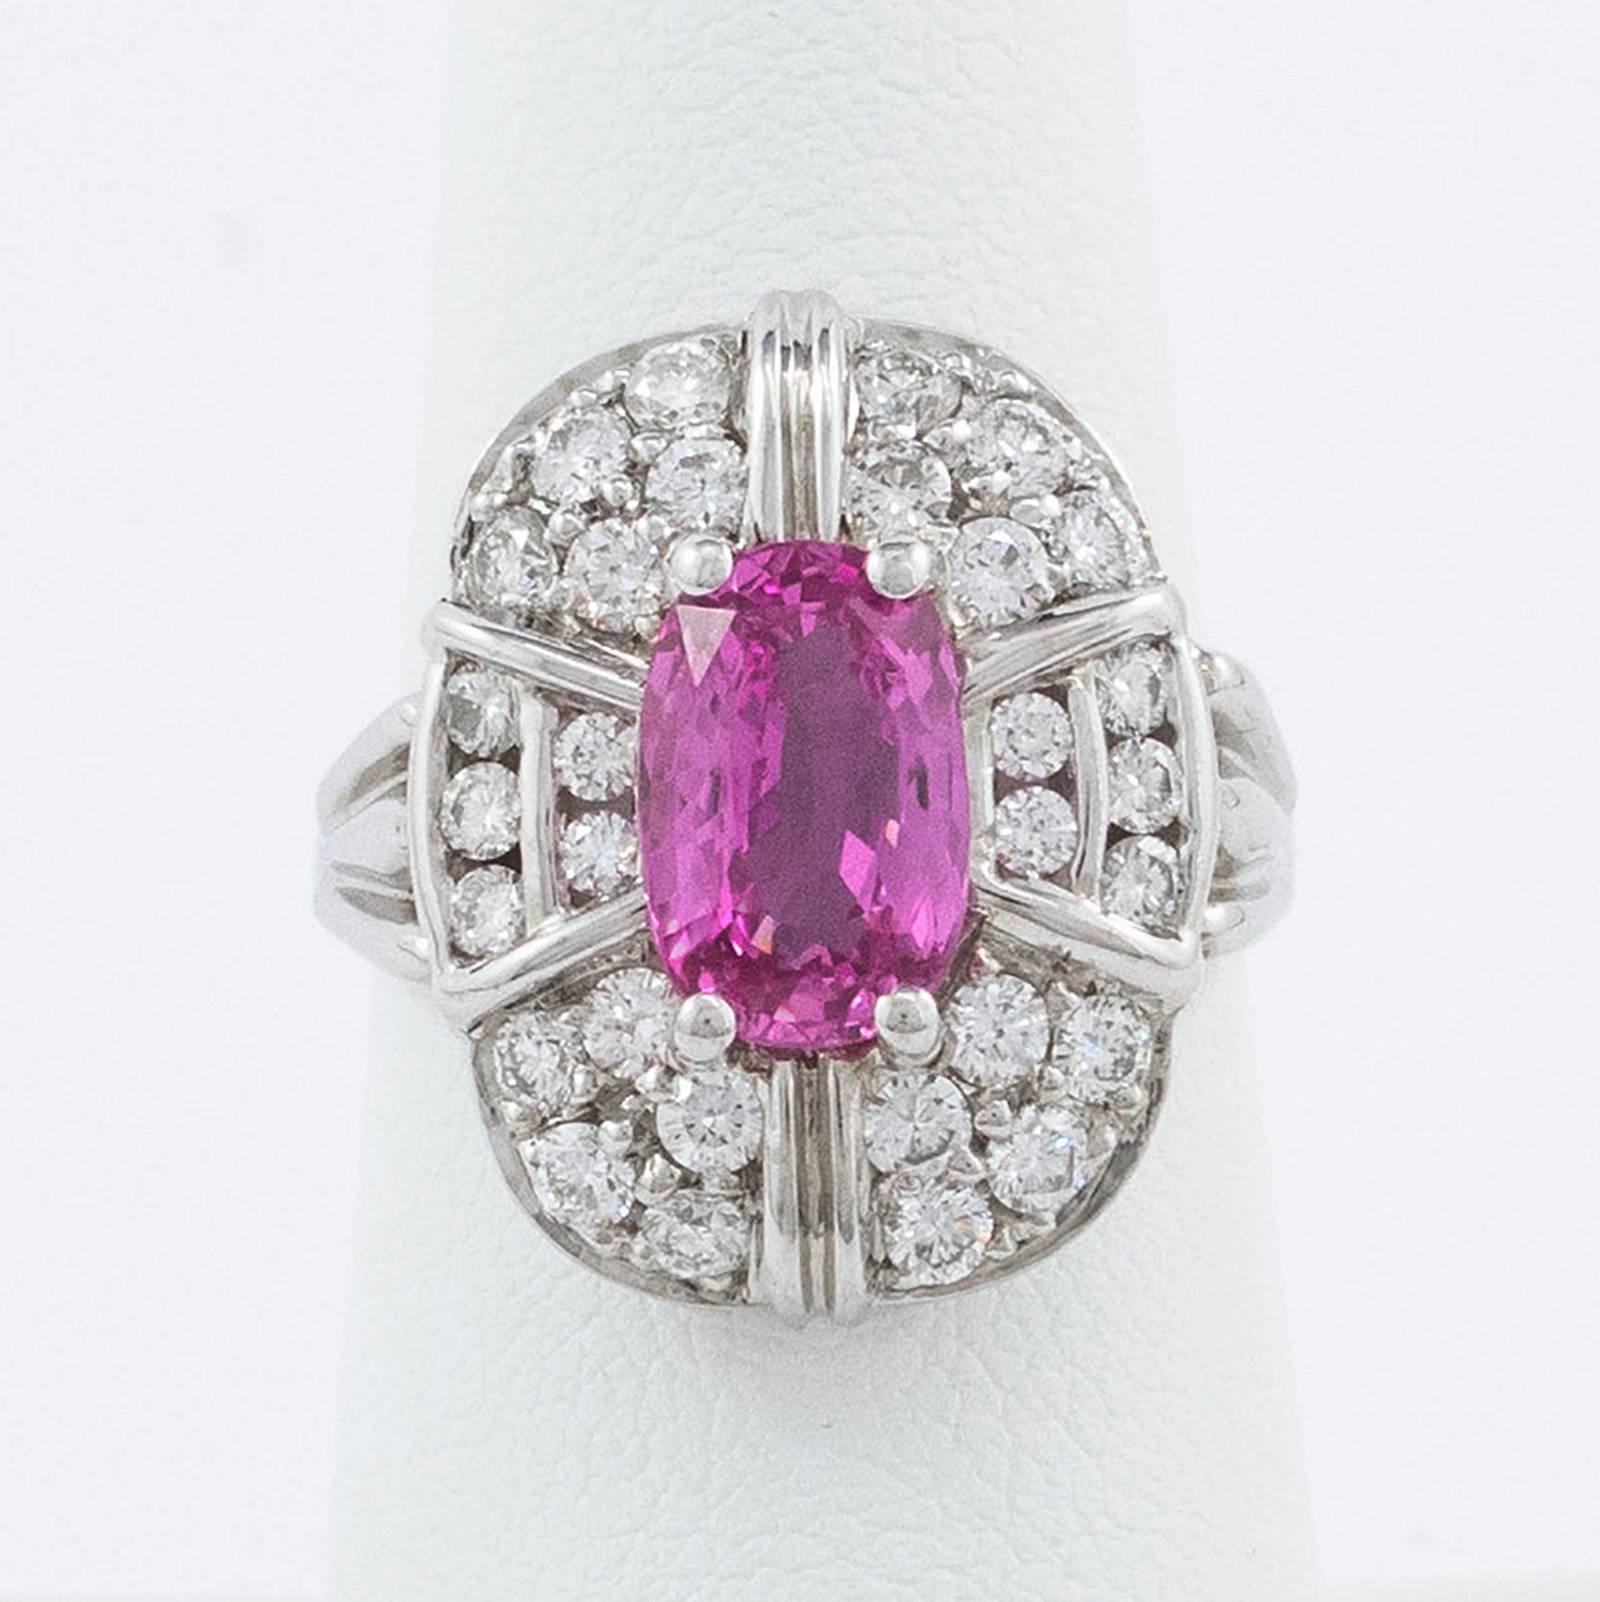 Splendid Pink Sapphire Diamond White Gold Ring In New Condition For Sale In Toronto, Ontario